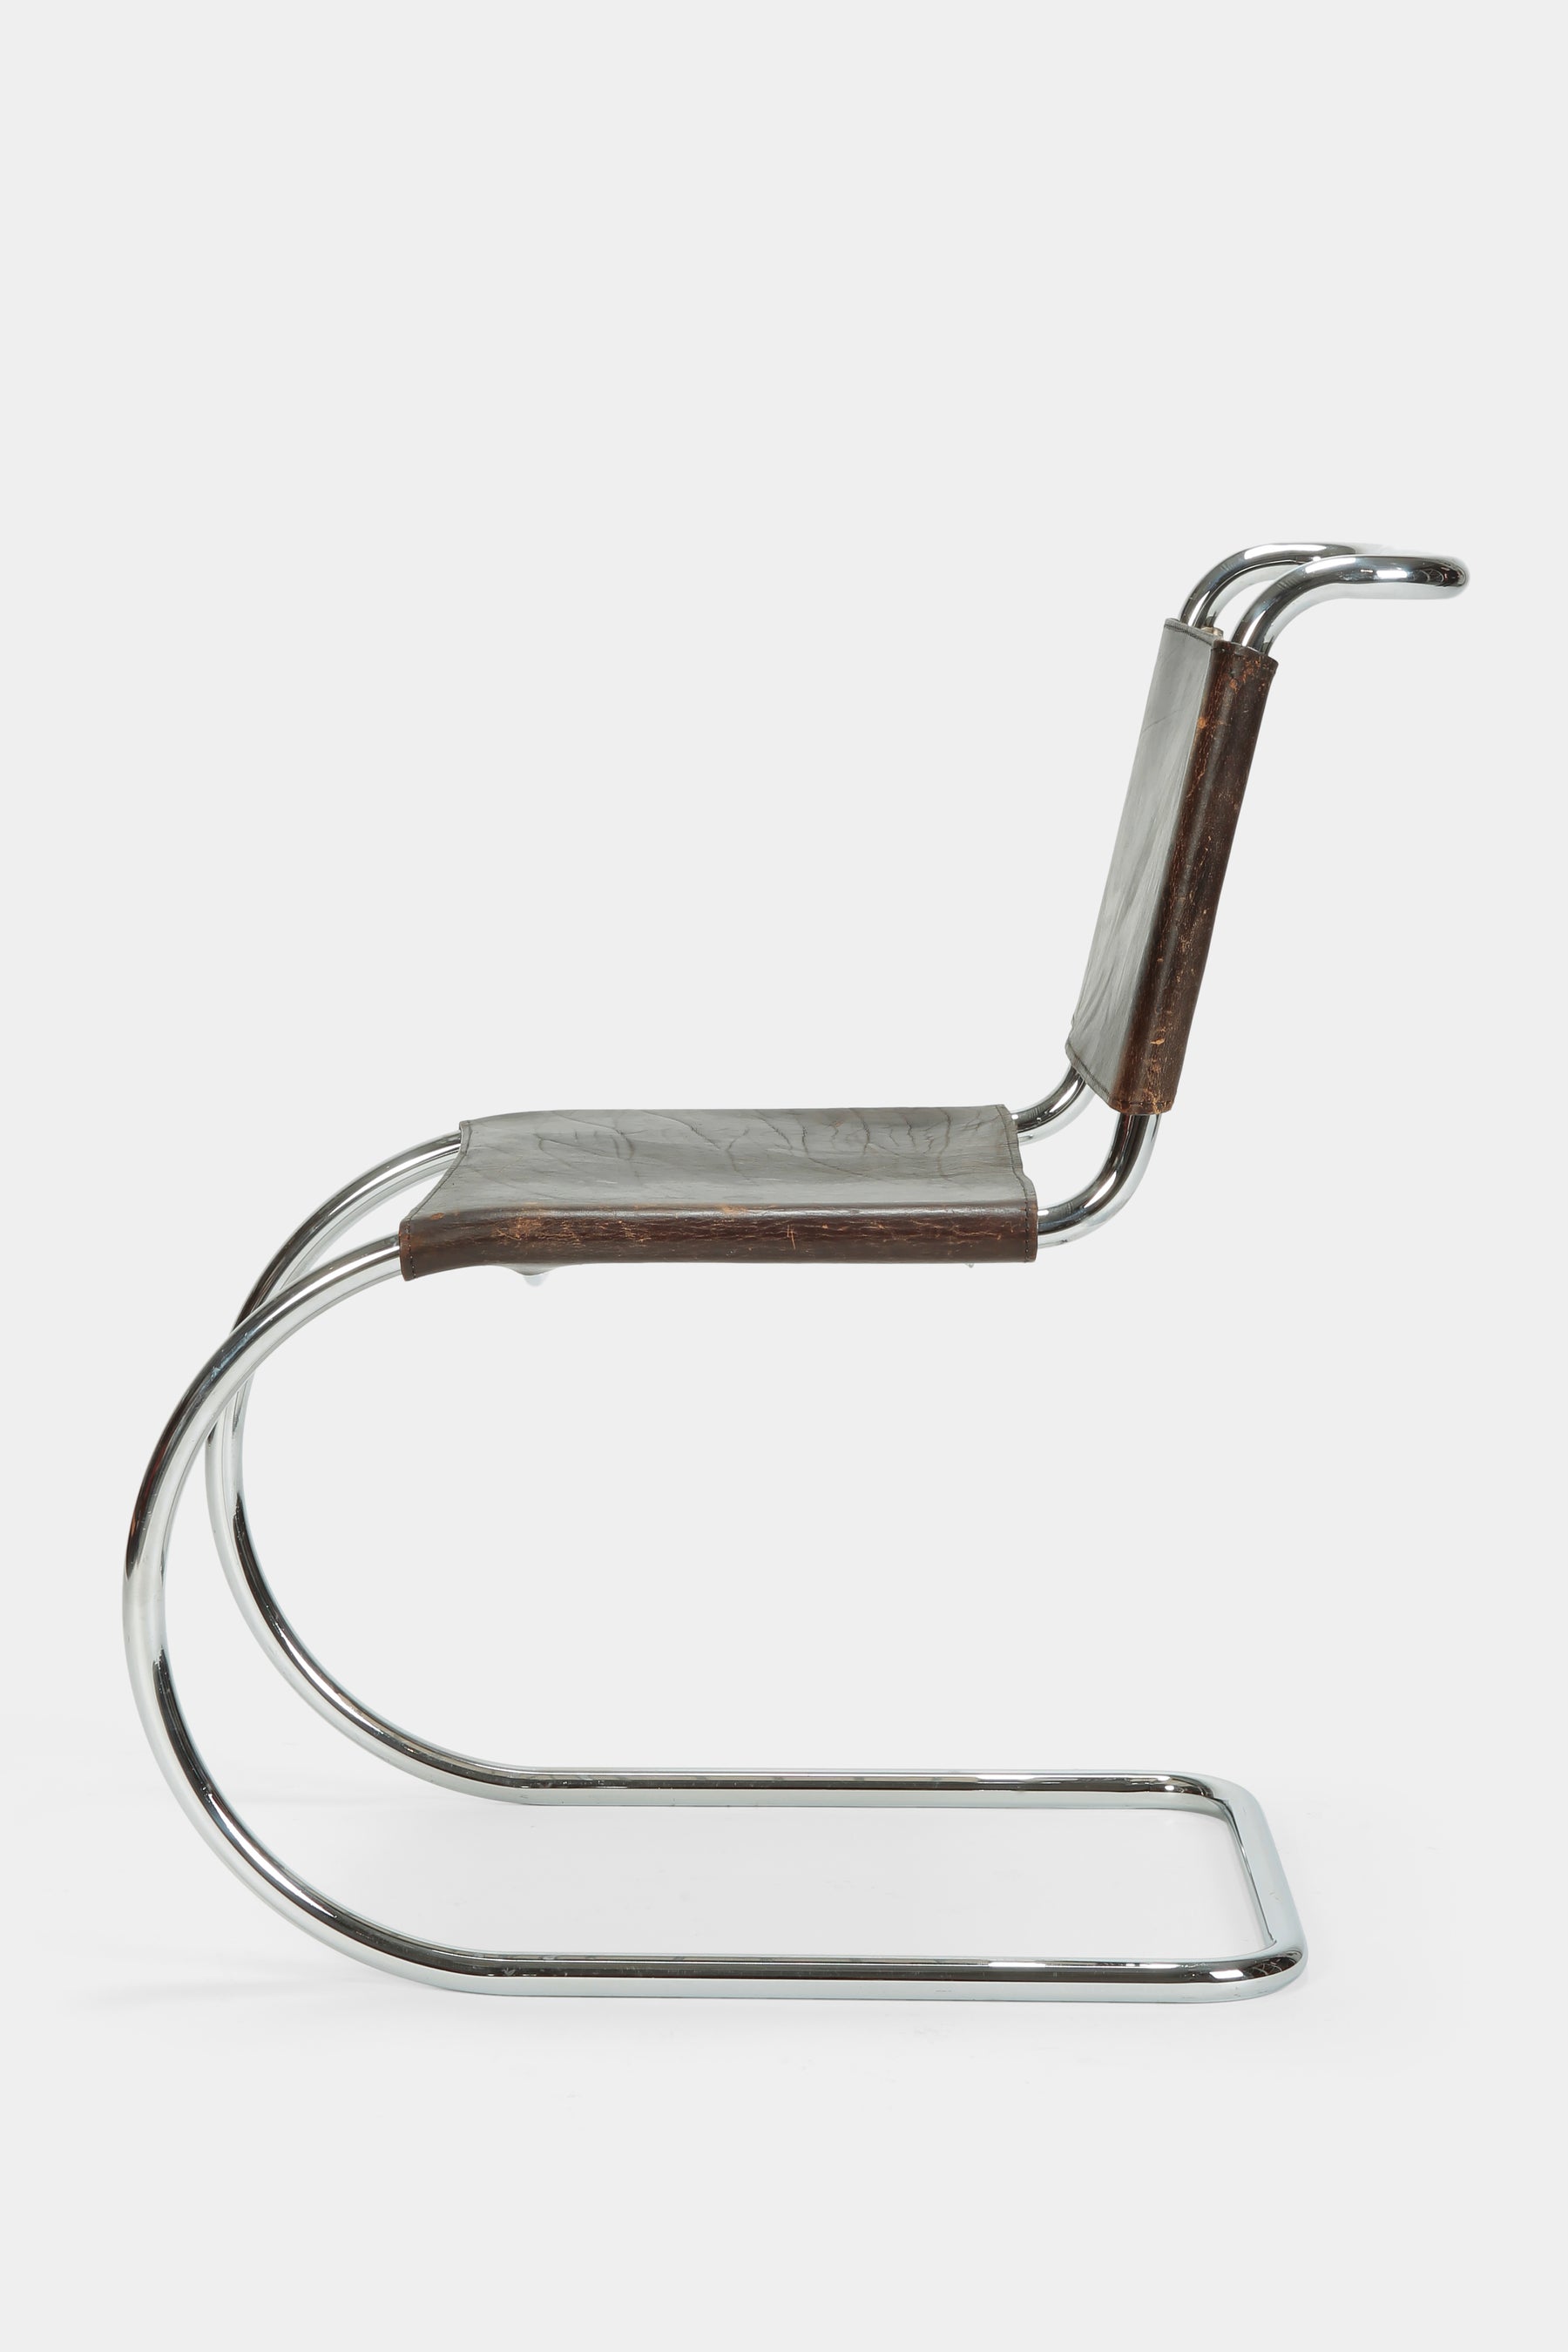 6 Mies van der Rohe Cantilever Chairs Knoll, 70s